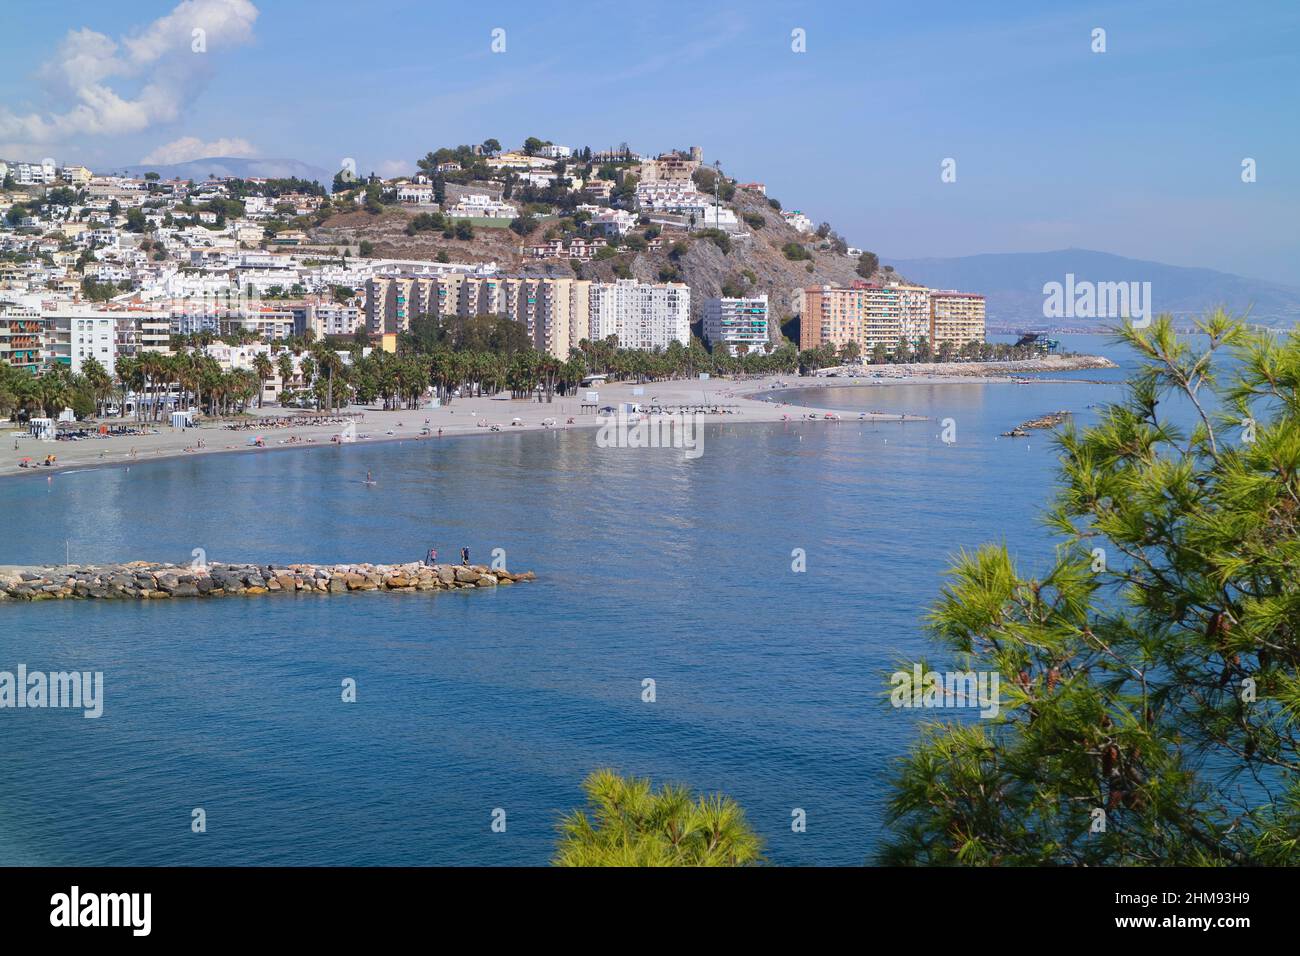 Almuñecar, Costa Tropical, Granada Province, Andalusia, southern Spain. Beaches at eastern end of town. Stock Photo